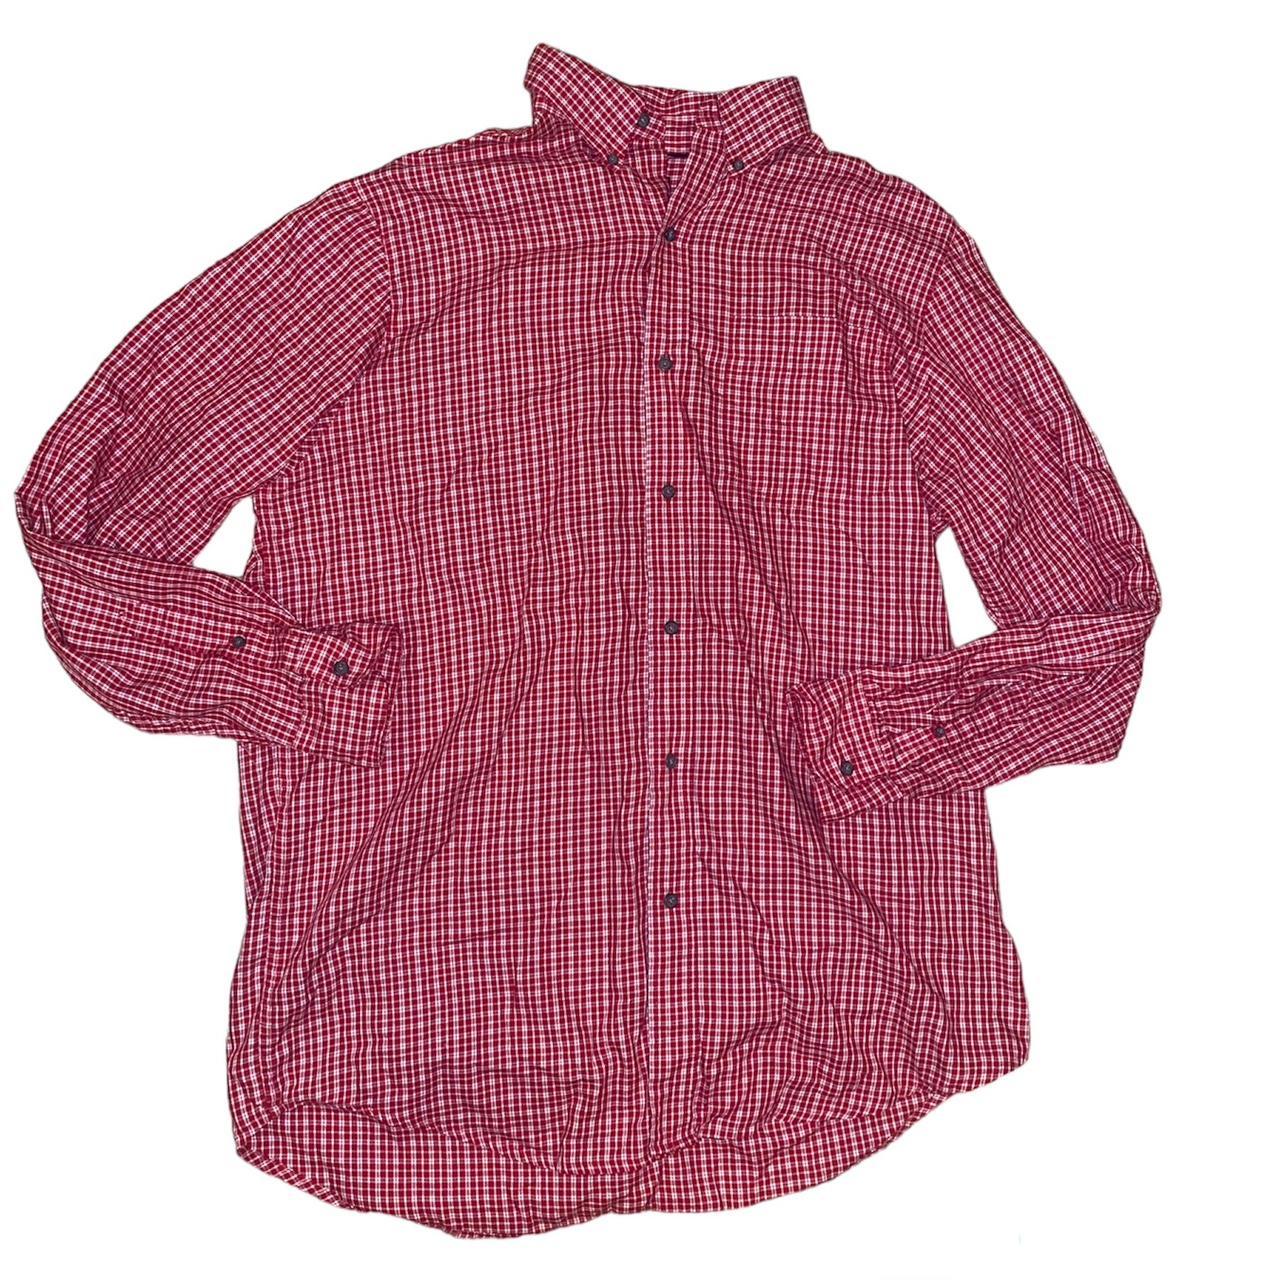 red plaid button up shirt brand is chaps size men’s... - Depop